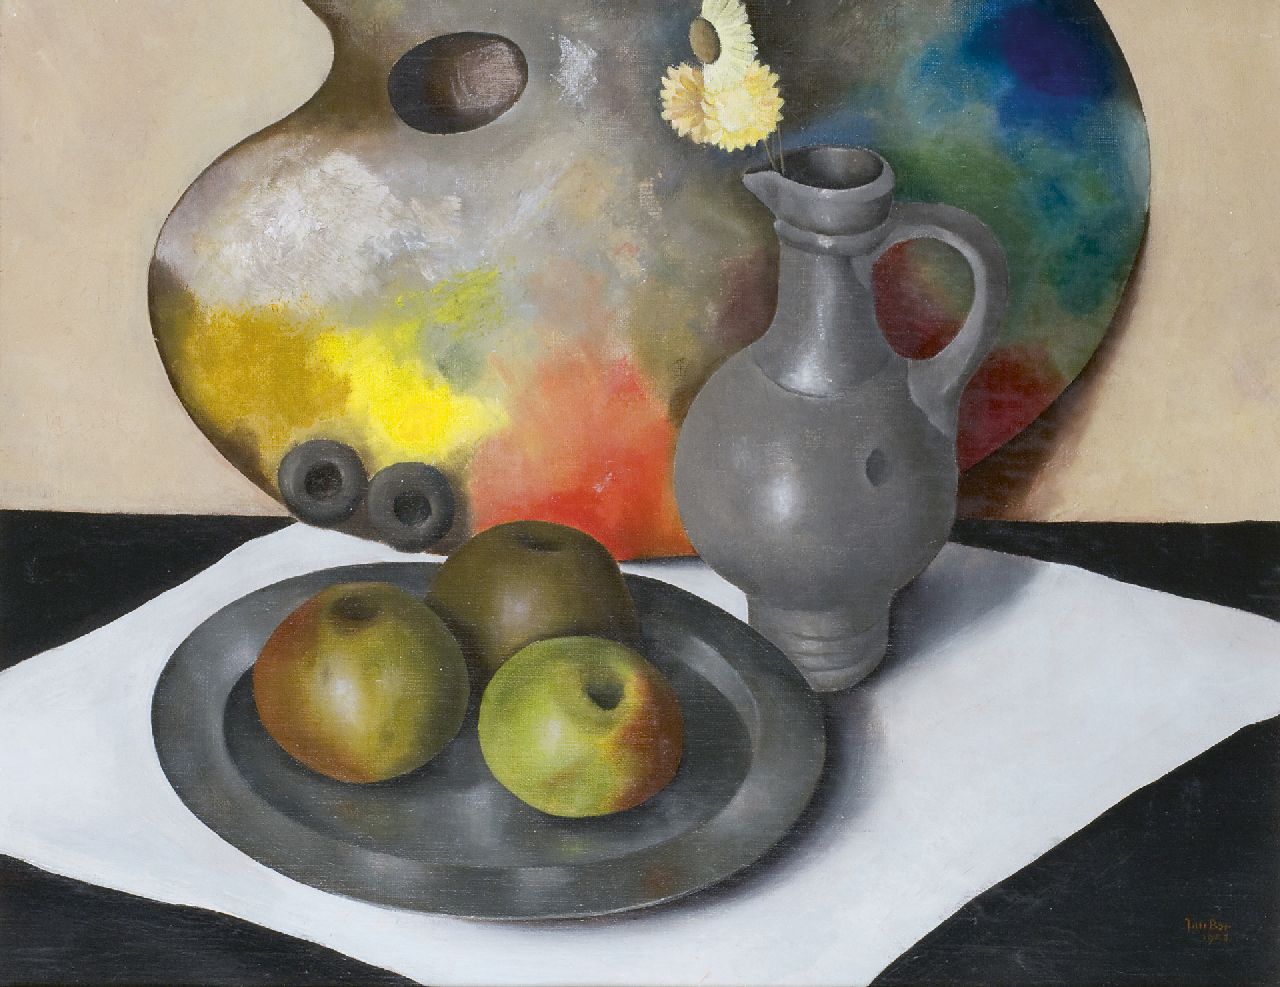 Bor J.  | Jan Bor, Still life with palette, apples, tinware and a jug, Öl auf Leinwand 39,8 x 50,3 cm, signed l.r. und dated 1943